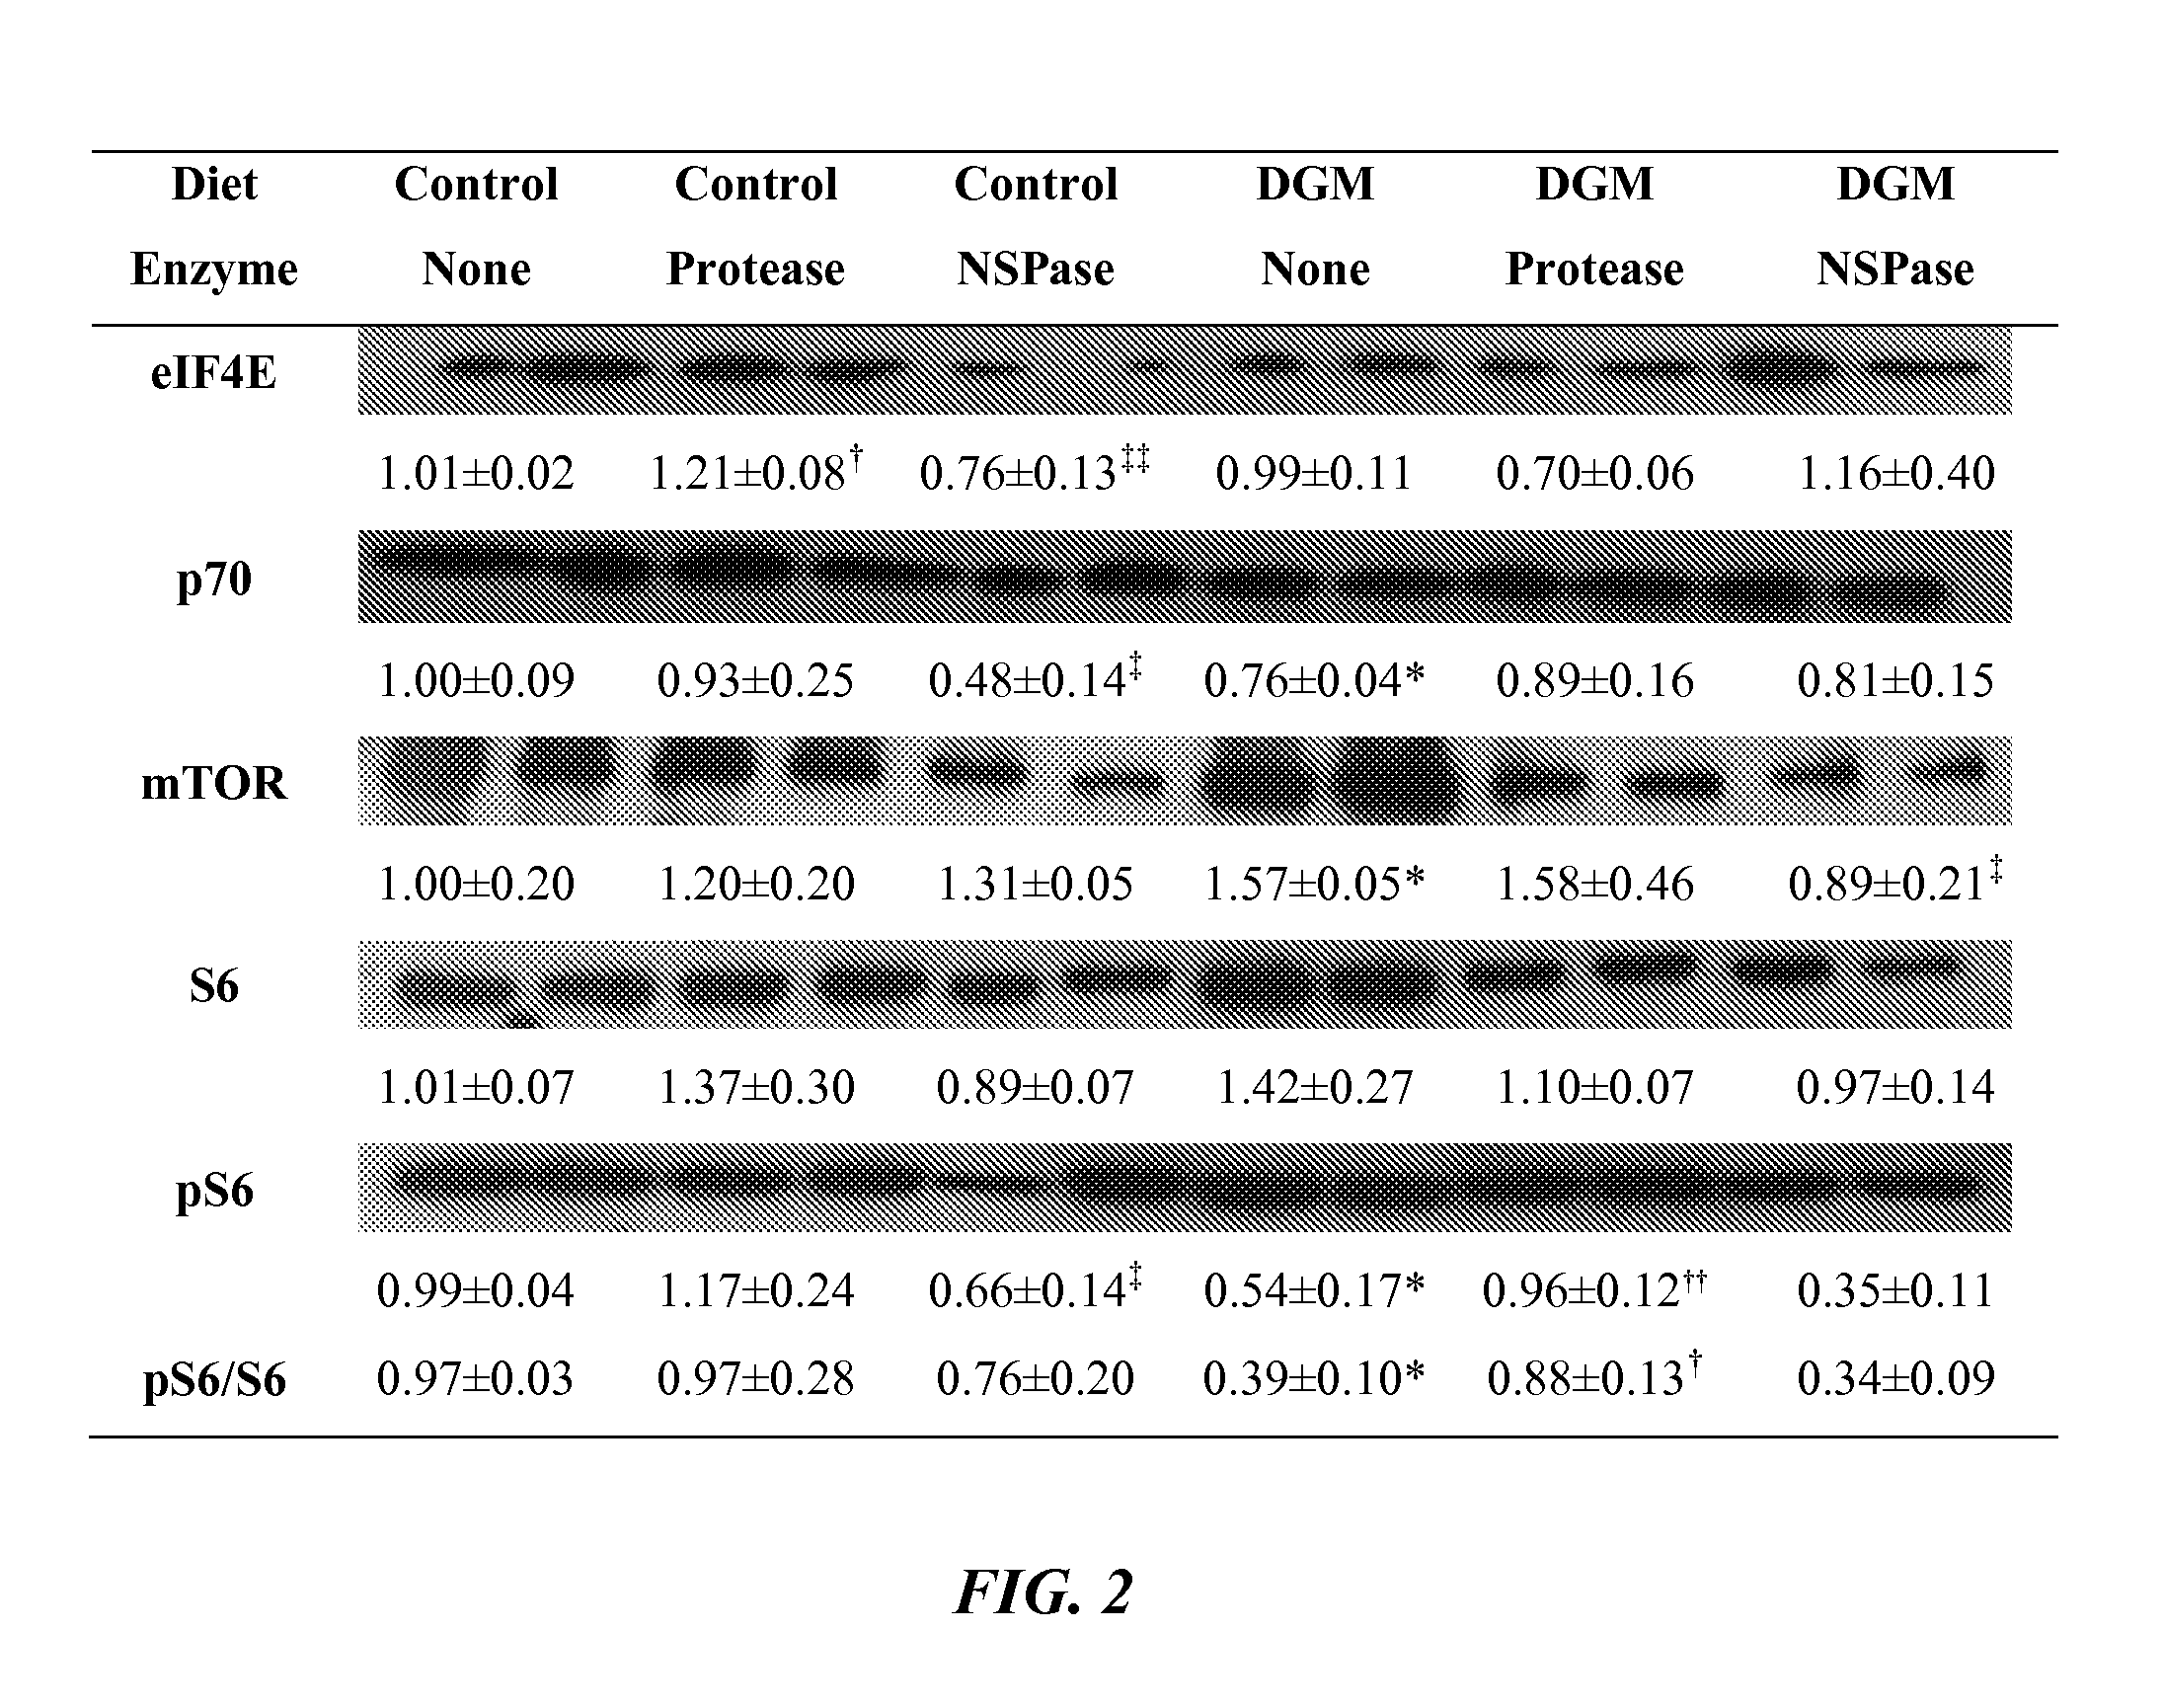 Algal-based animal feed composition containing exogenous protease animal feed supplement, and uses thereof